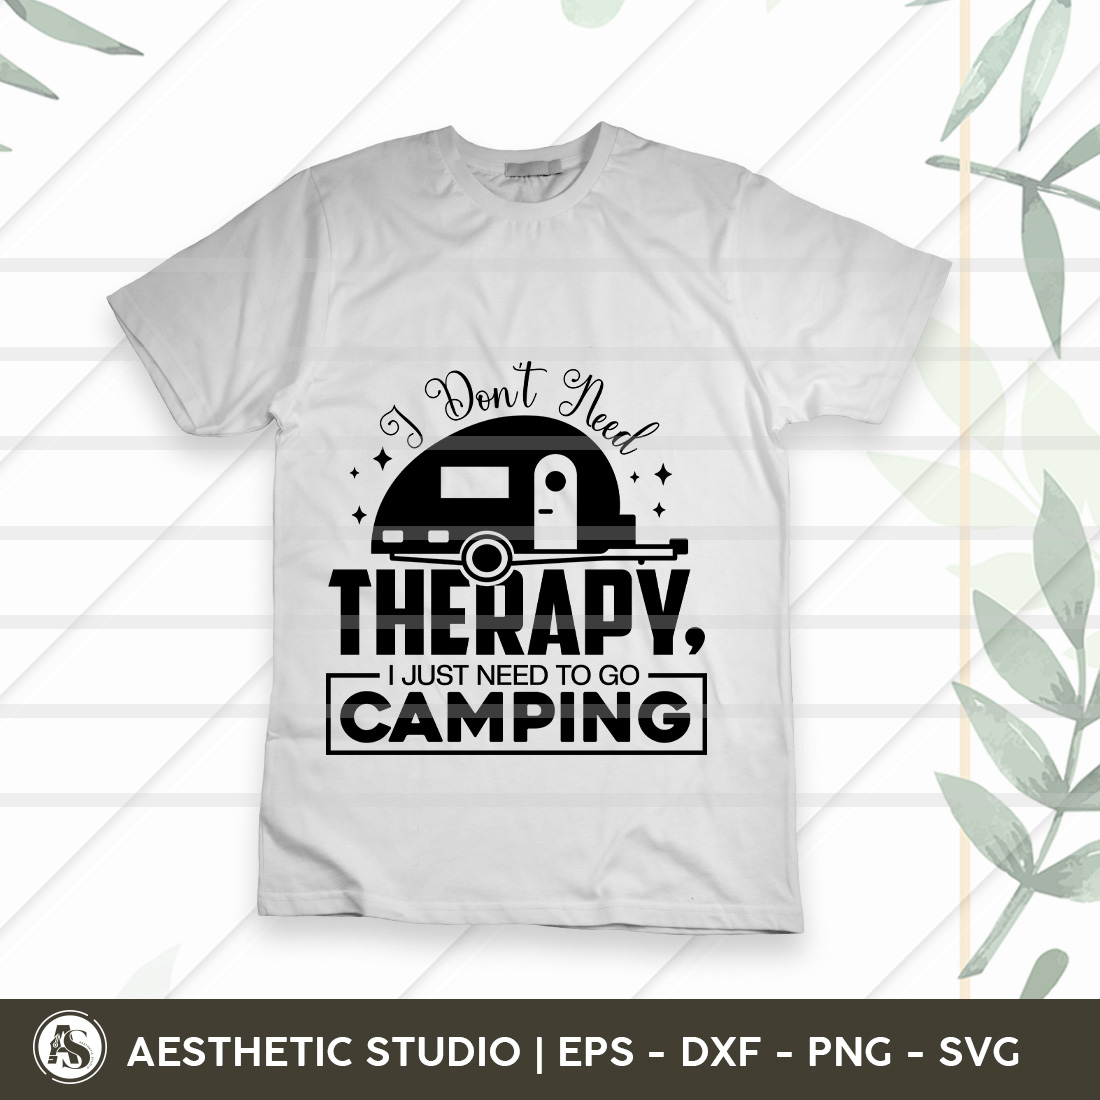 I Don’t Need Therapy I Just Need To Go Camping, Camper, Adventure, Camp Life, Camping Svg, Typography, Camping Quotes, Camping Cut File, Funny Camping, Camping T-shirt Design, Svg, Eps, Dxf, Png, Cut file preview image.